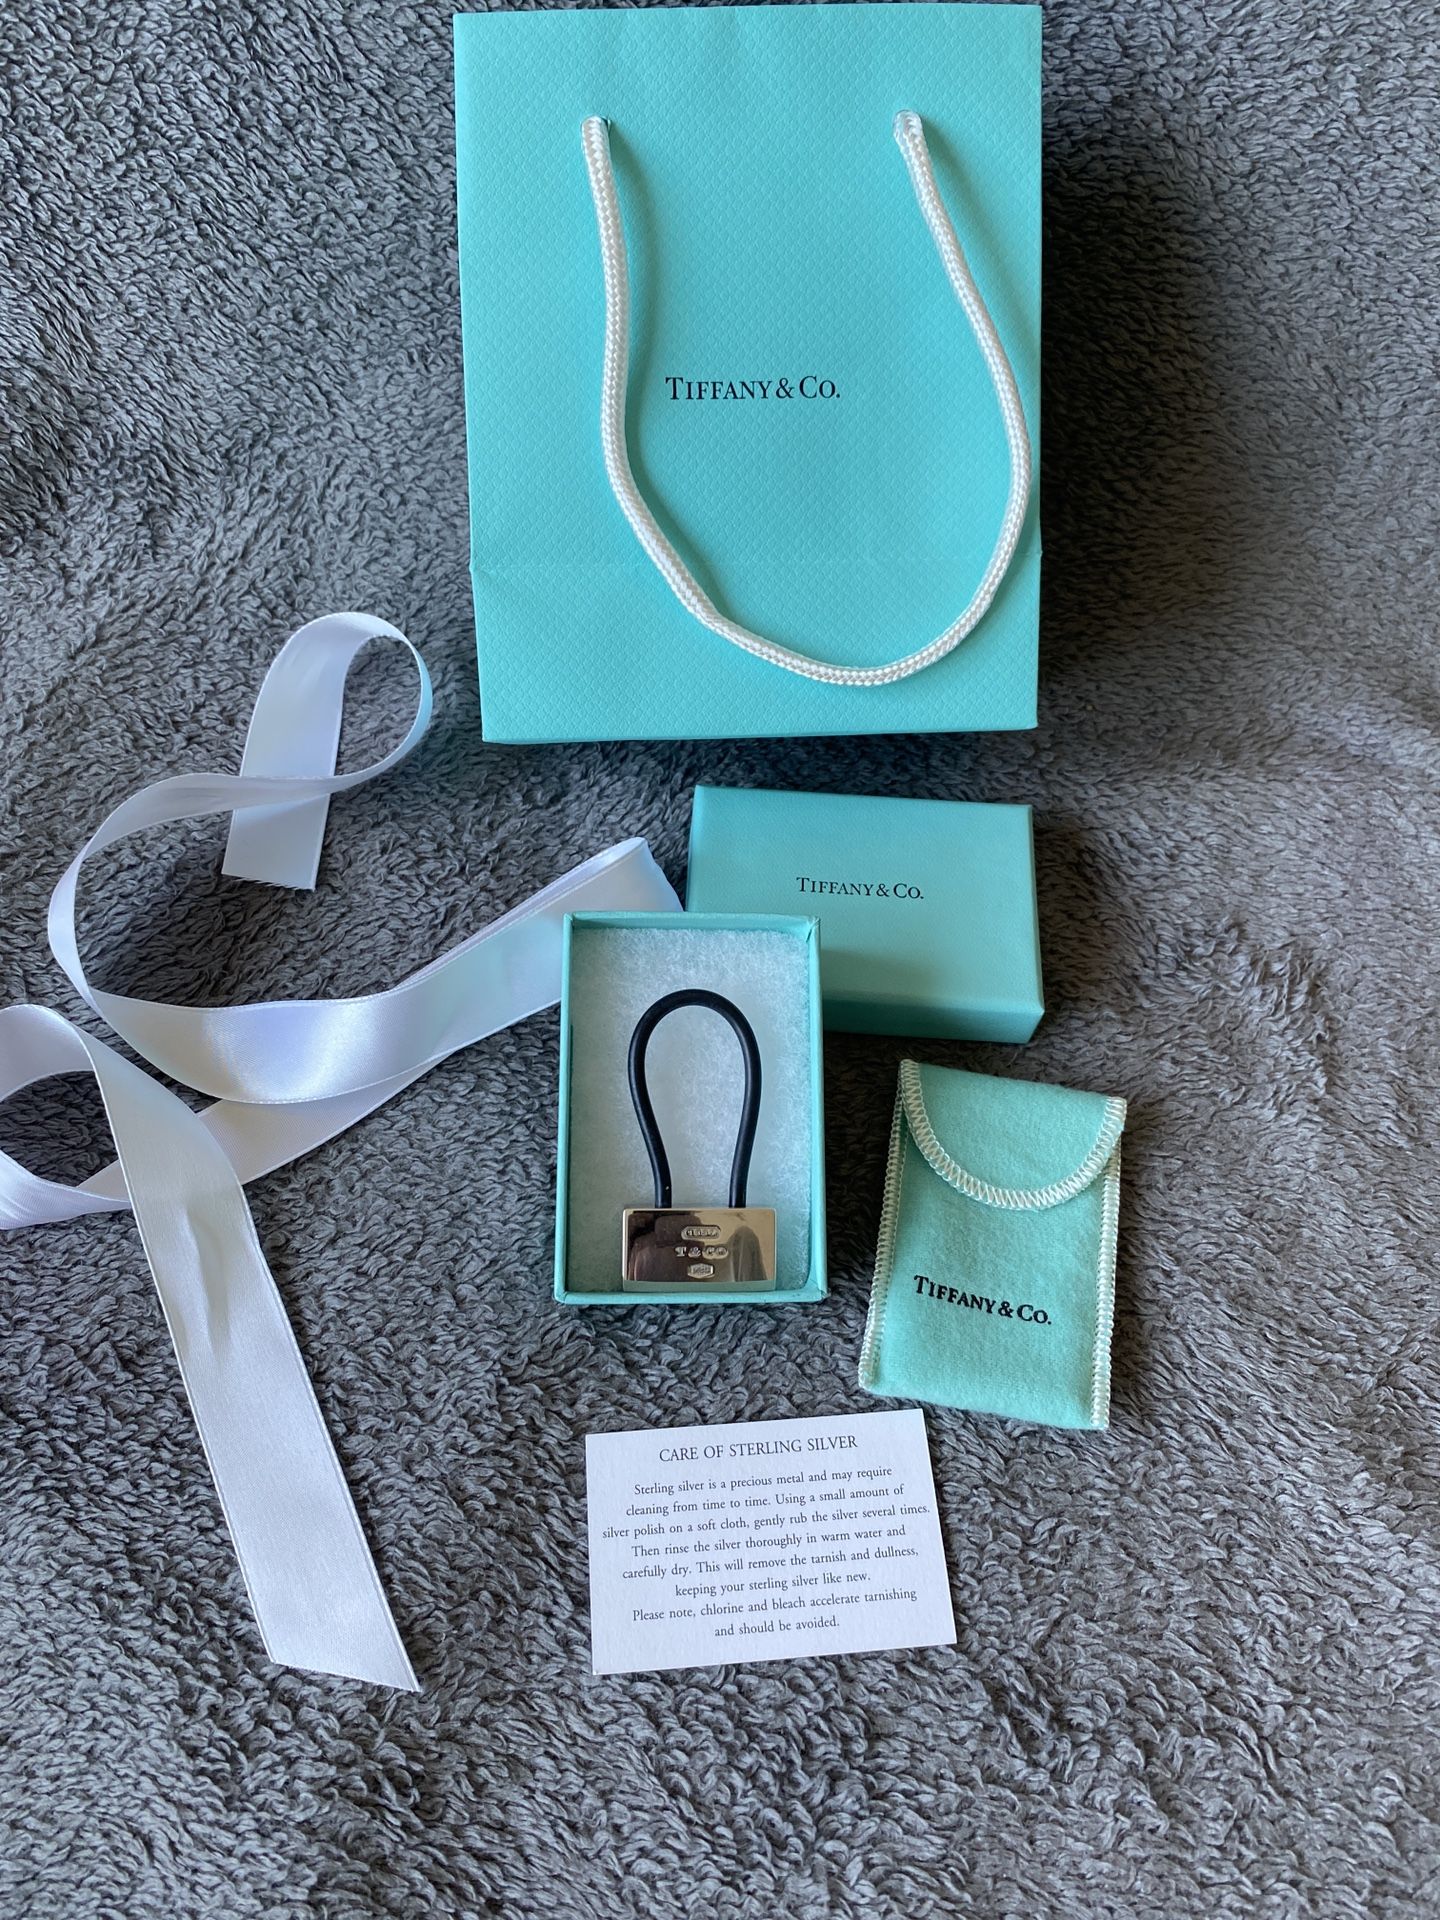 Tiffany & Co NEW Empty Blue Box Suede Pouch Gift Bag Polishing Cloth  Packaging